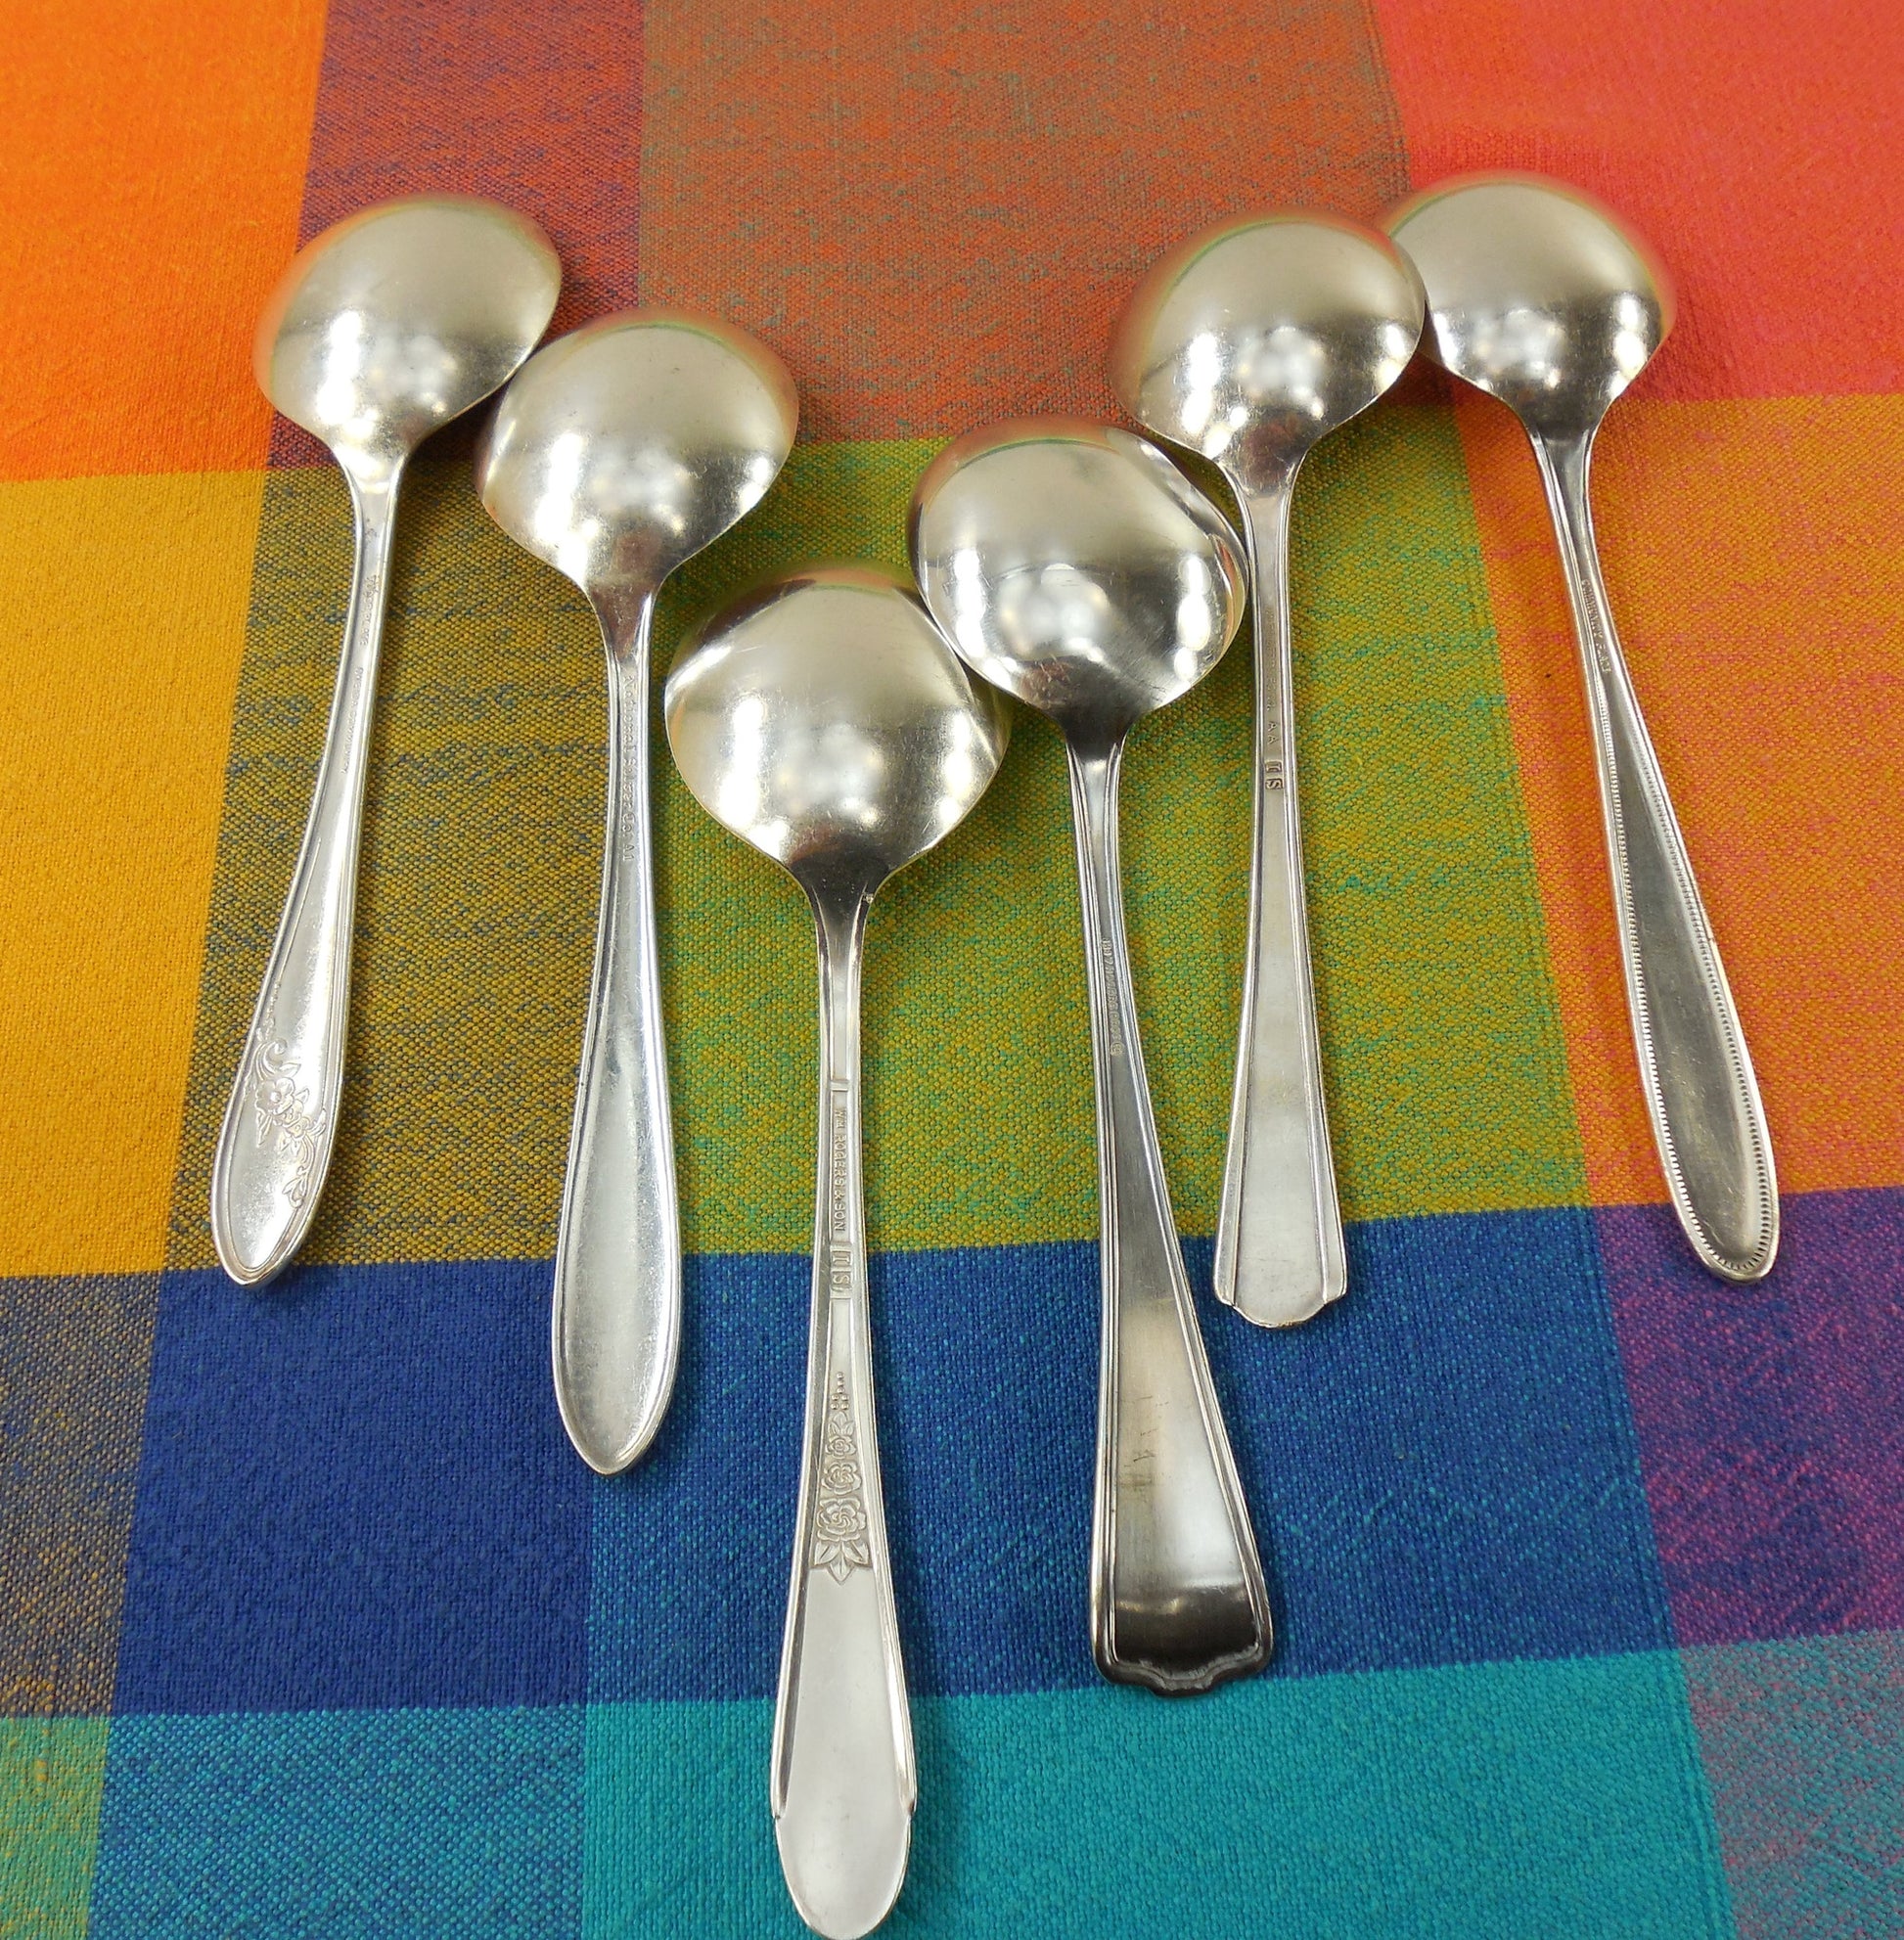 Vintage Mismatched Silverware - 6 Set Silverplate Gumbo Soup Spoons - Back View